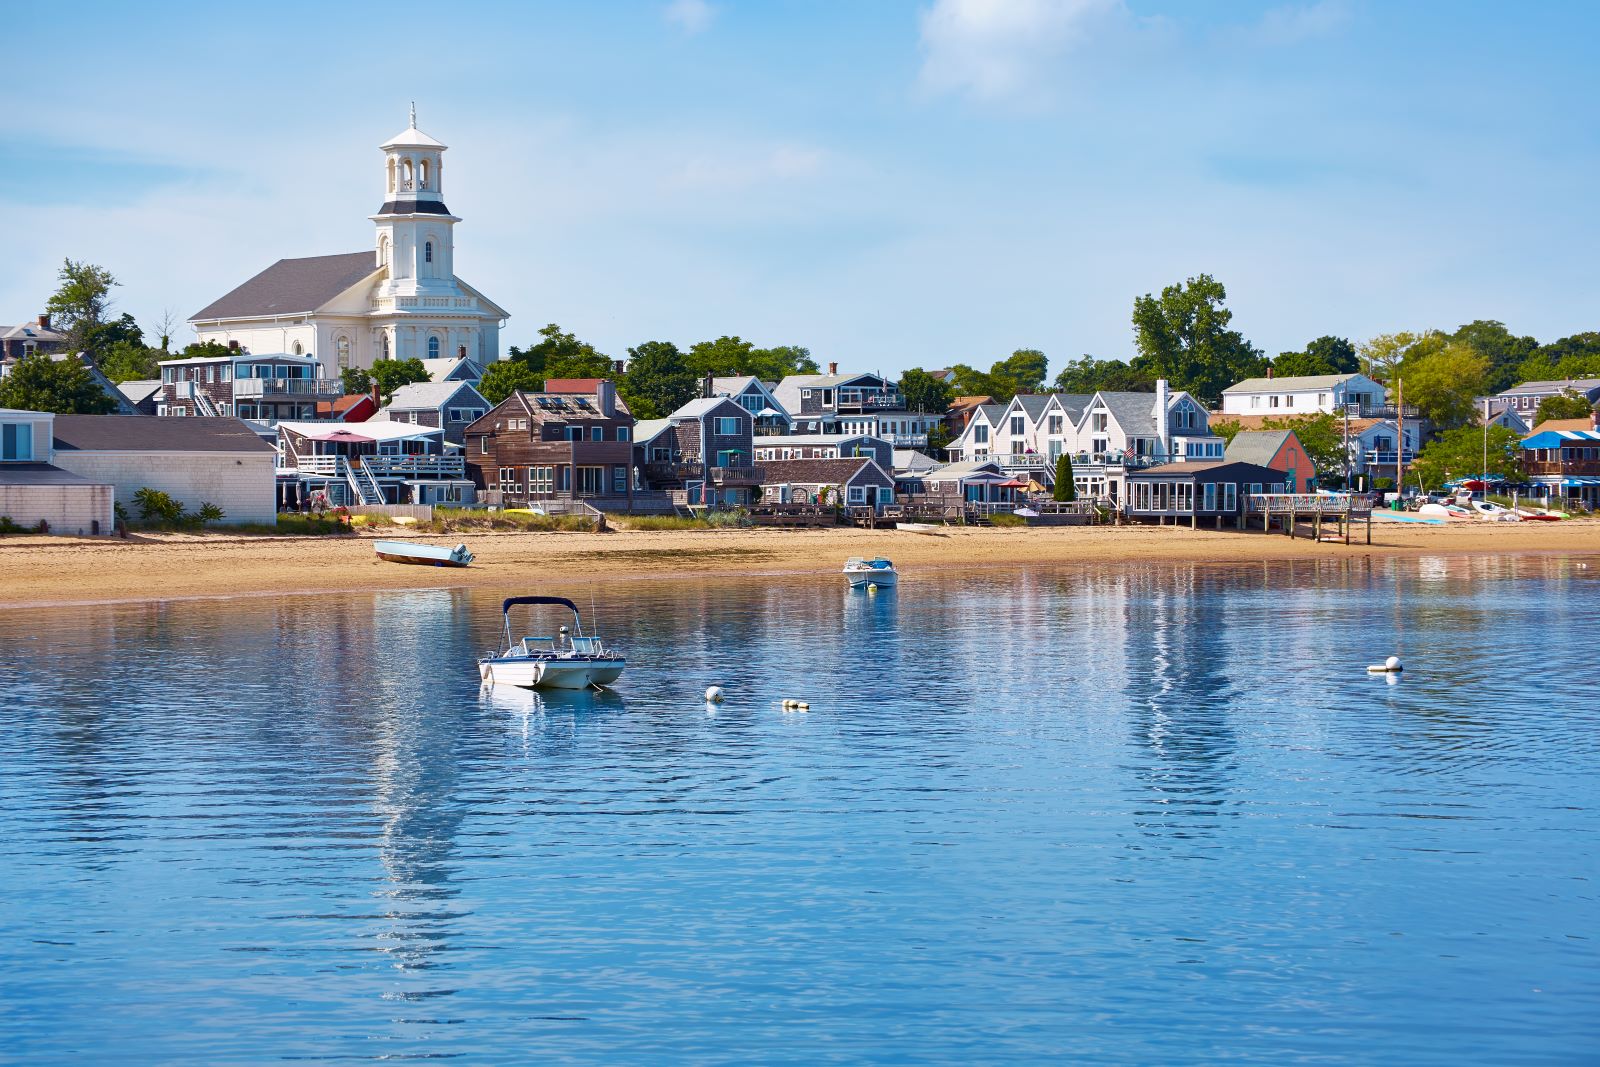 Image credit: Shutterstock / lunamarina <p>Cape Cod’s quaint towns and beautiful beaches are perfect for a low-key family weekend. Tip: Traveling before Memorial Day or after Labor Day can offer quieter visits and lower prices.</p>